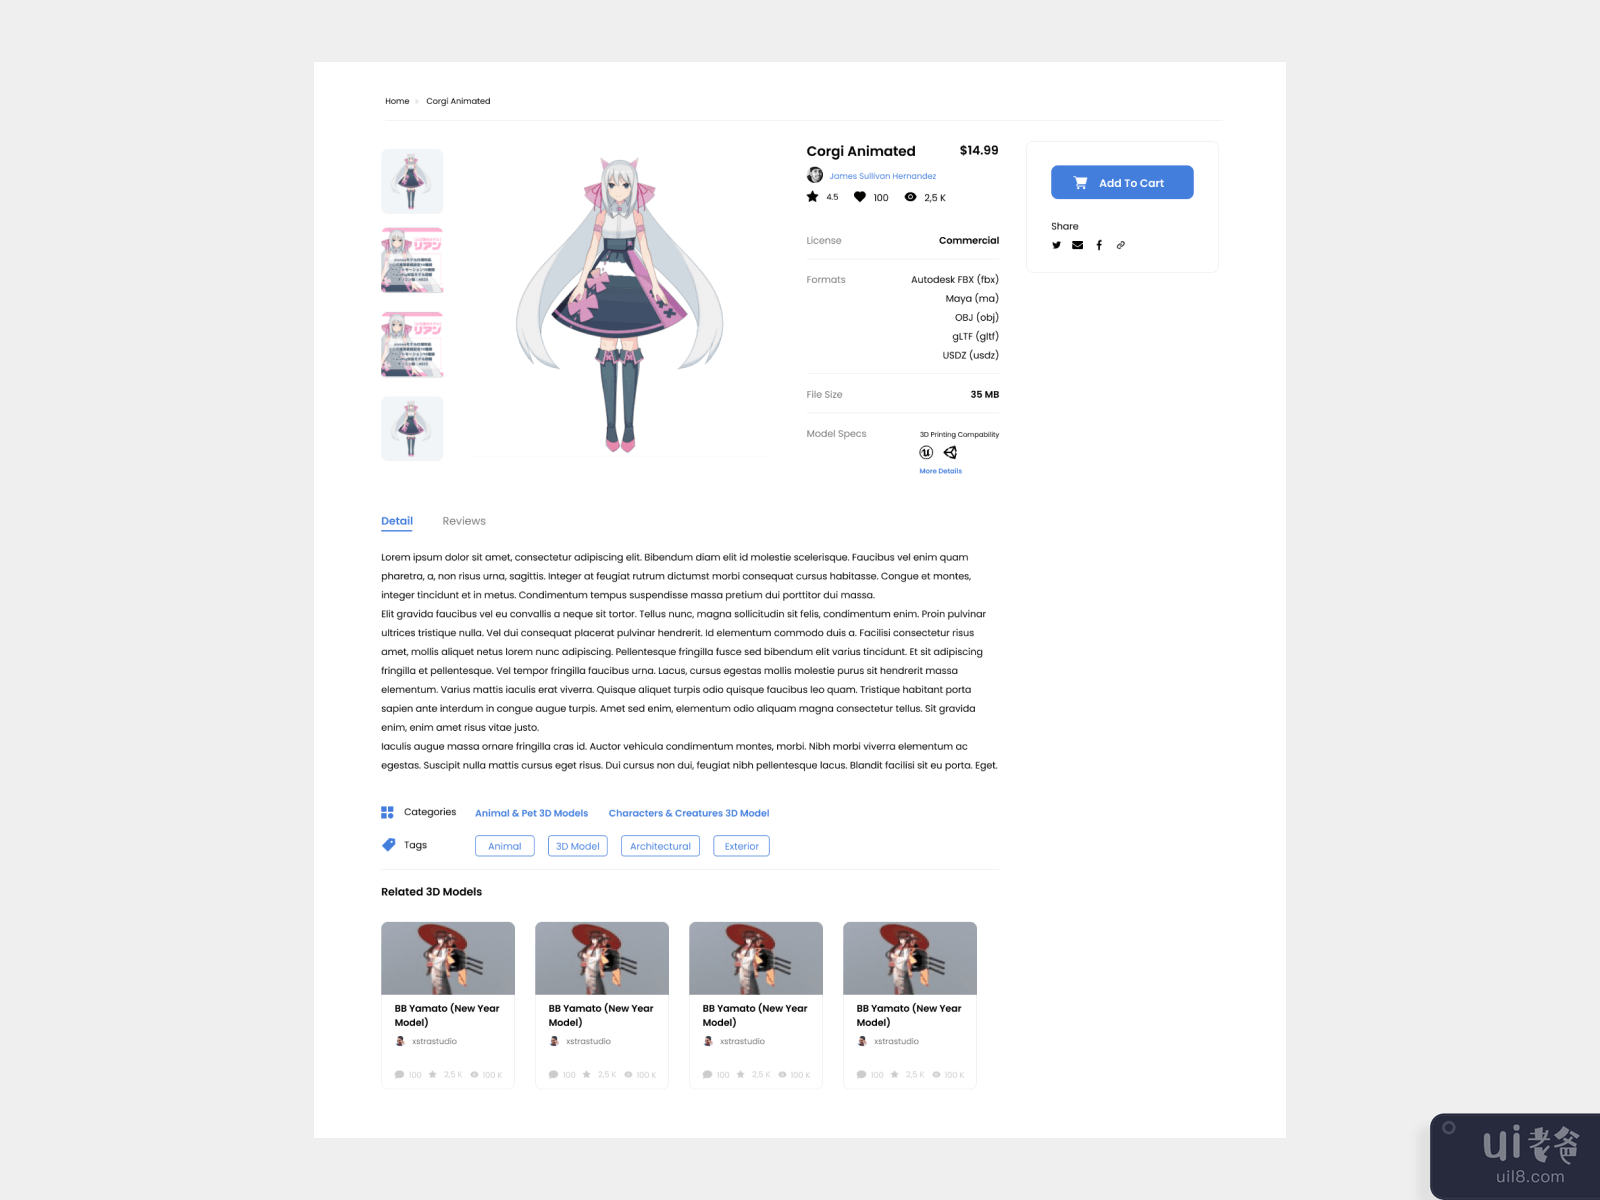 3D 模型产品/详细信息页面(3D Model Product / Detail Page)插图